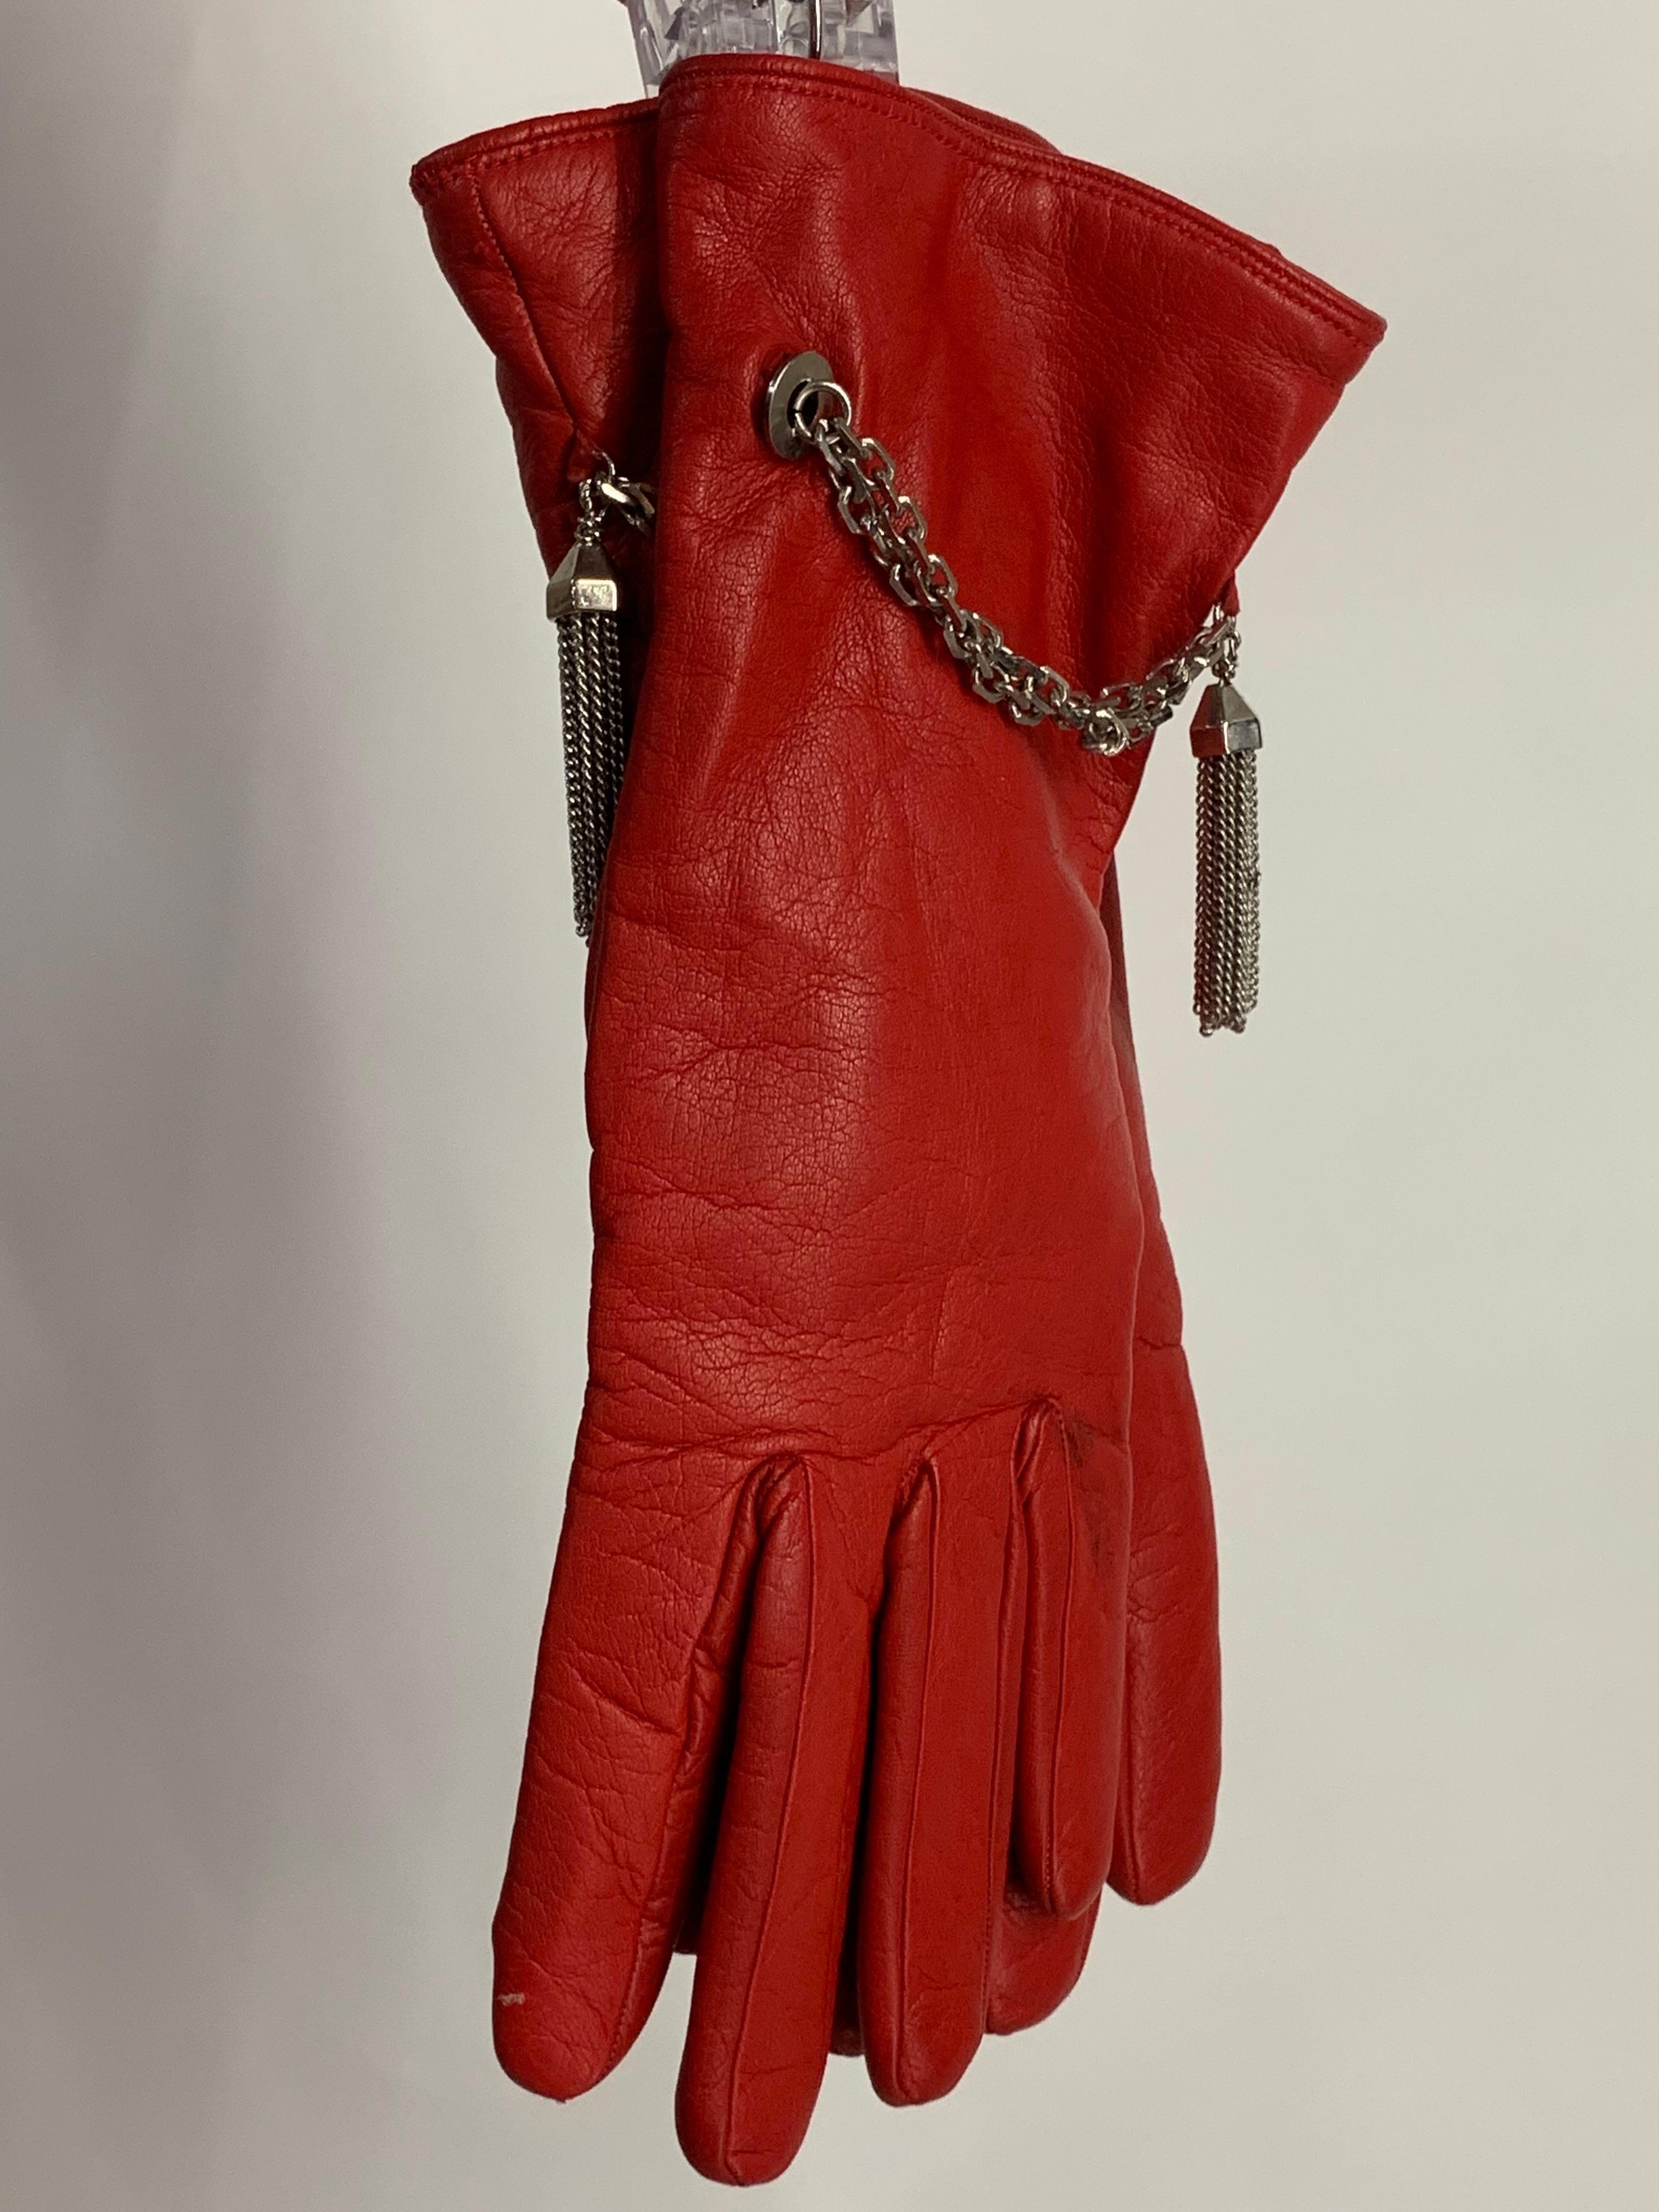 1980s Gianni Versace Red Kid Leather Gloves w Cashmere Lining & Tassel Chain  For Sale 3